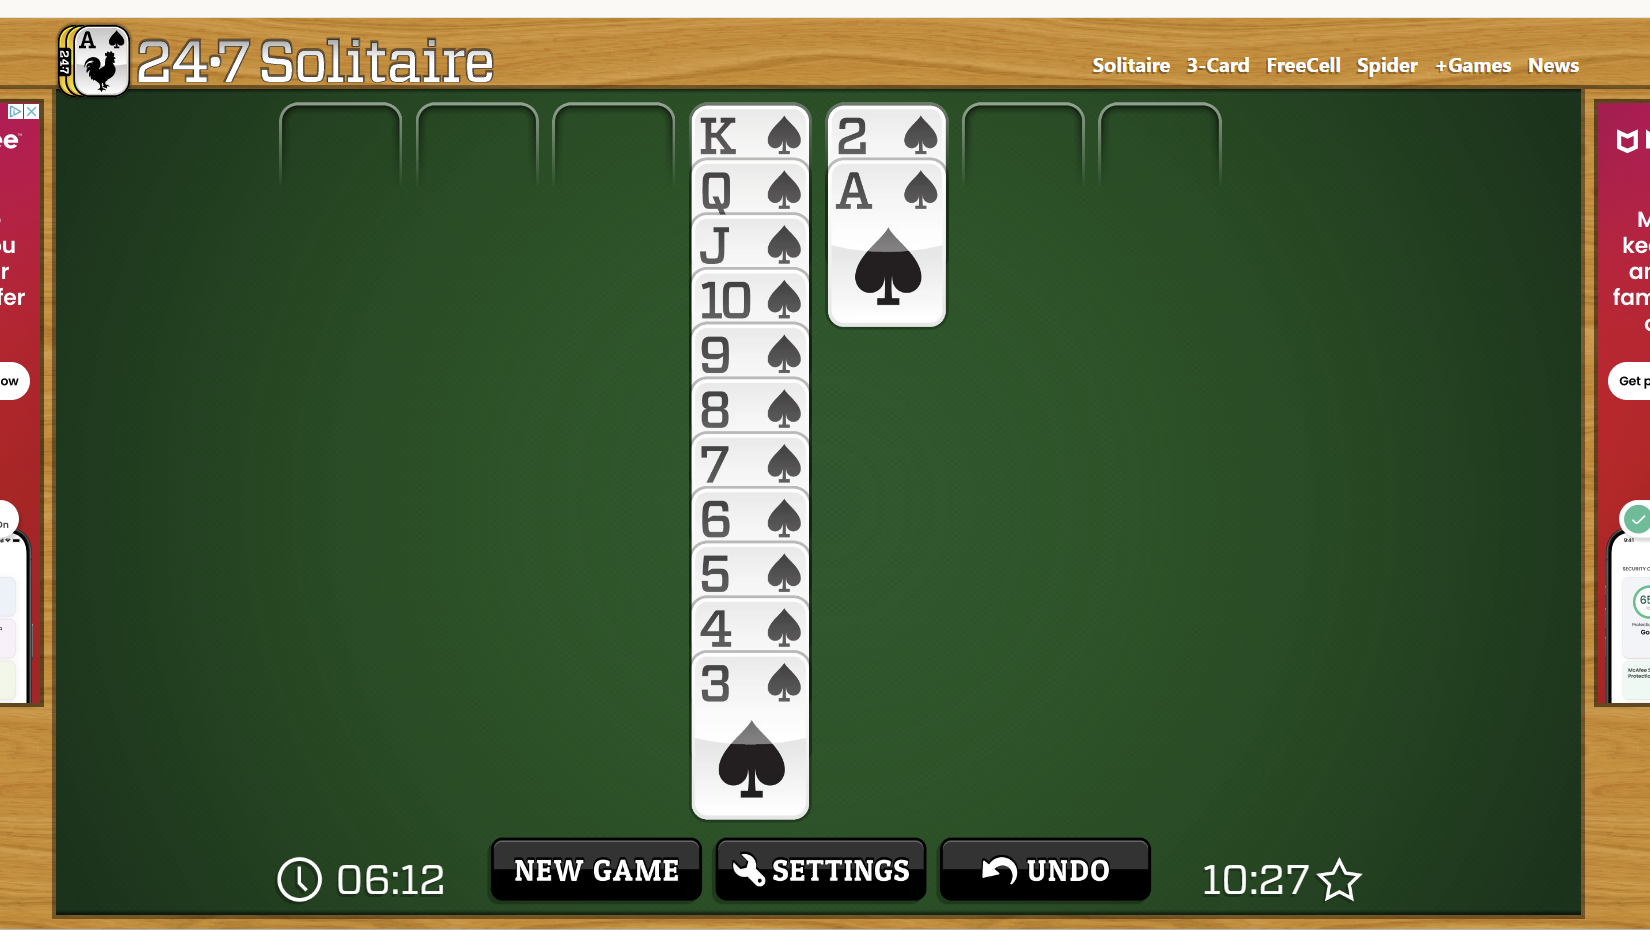 win was solitaire